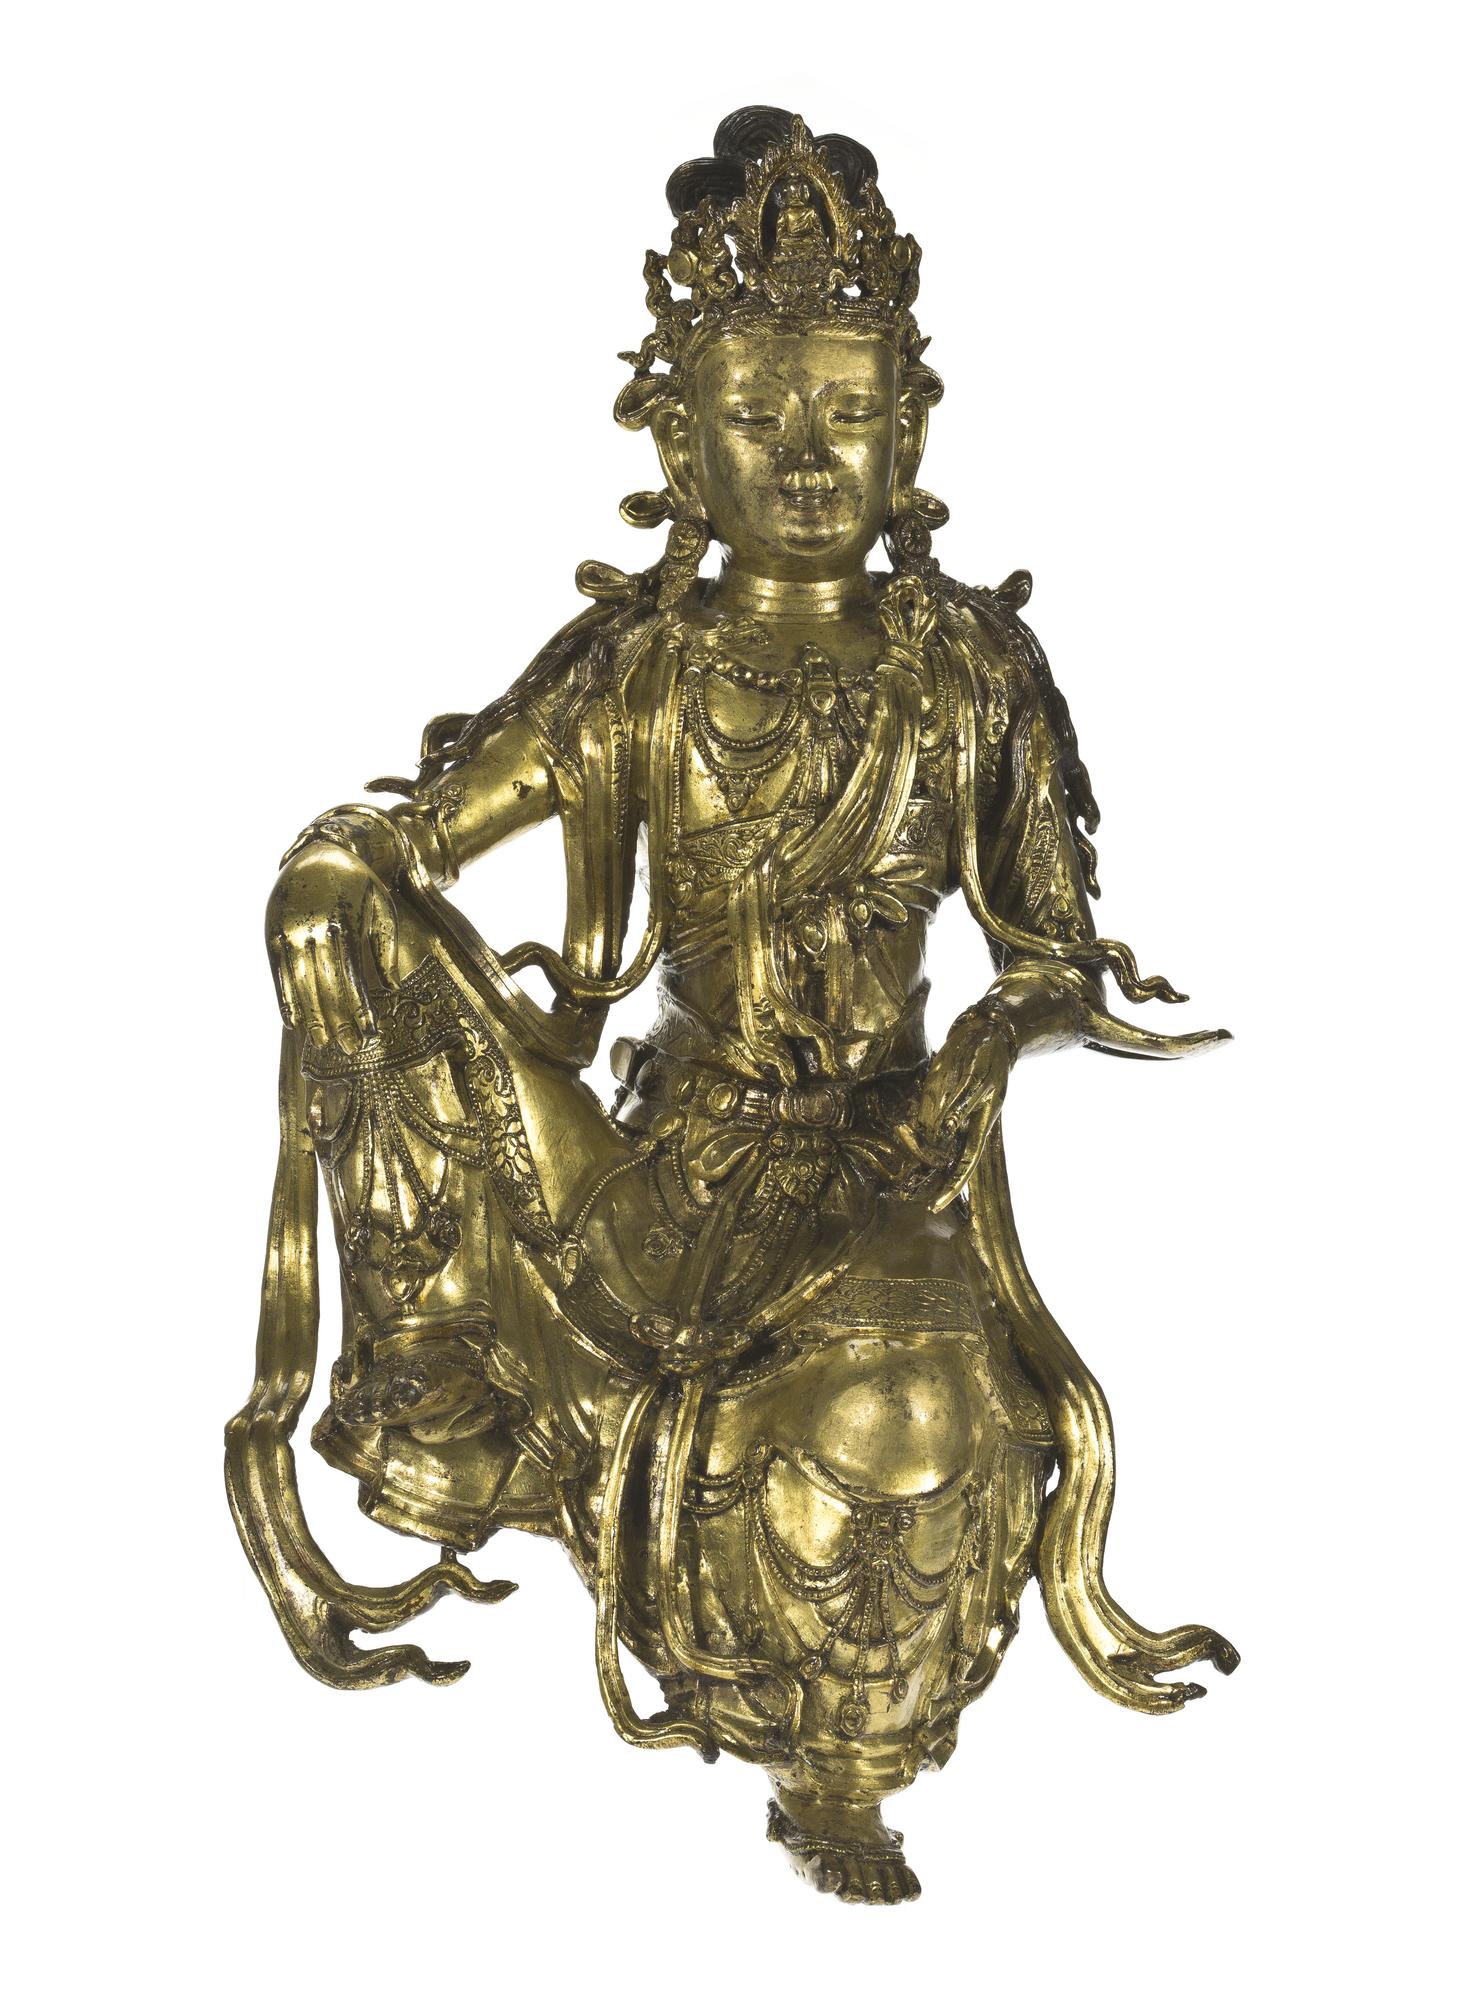 Figure of Guanyin, bodhisattva of compassion, in gilt bronze, with flowing robes, a jewelled corsage and diadem: China, Qing Dynasty, Qianlong reign, 1736-95 AD.